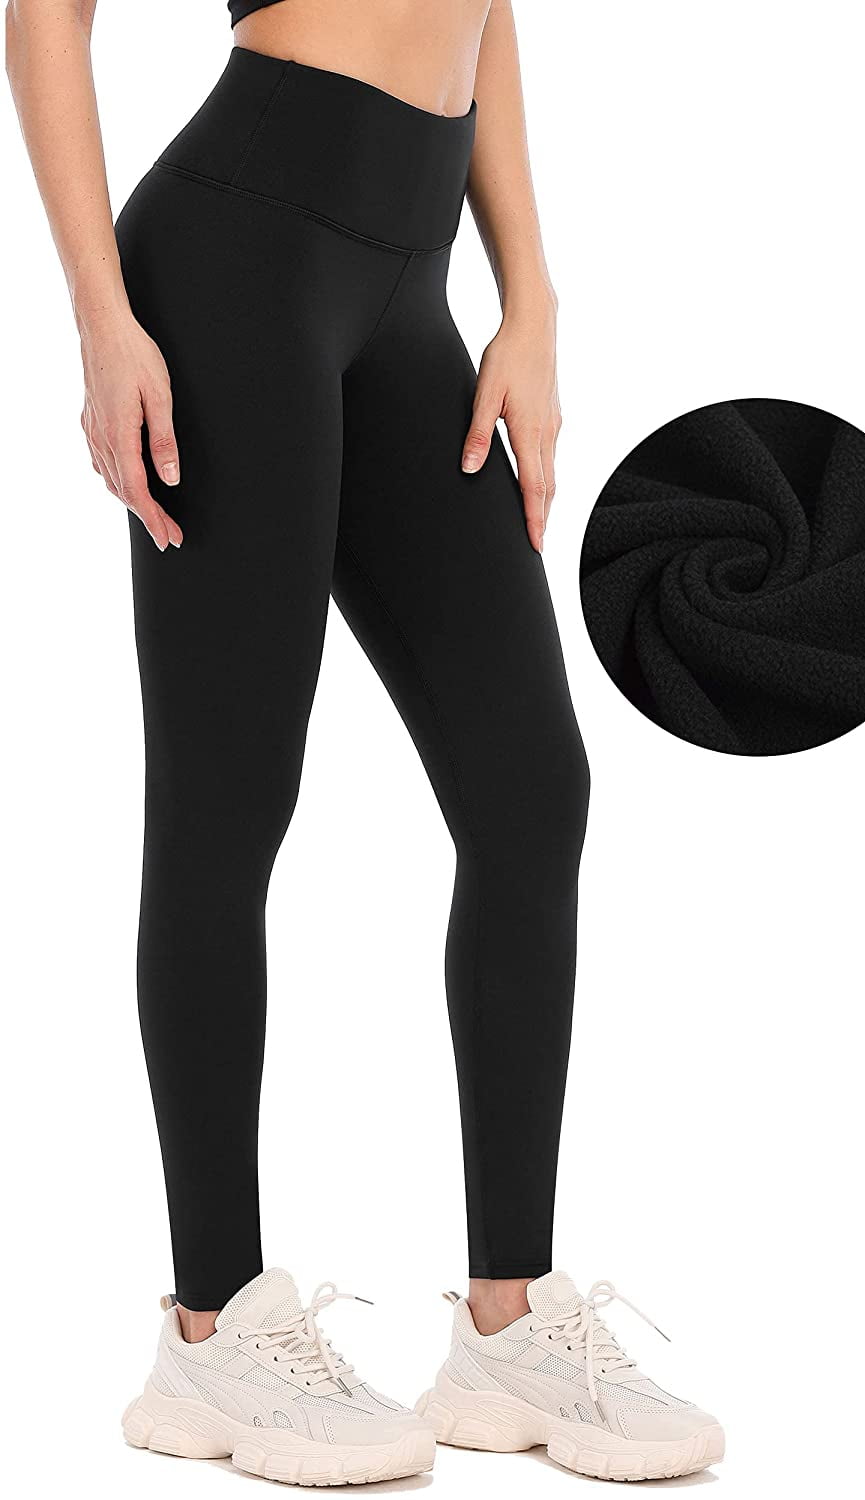 Women's Fleece Lined Leggings Winter Thermal Insulated Workout